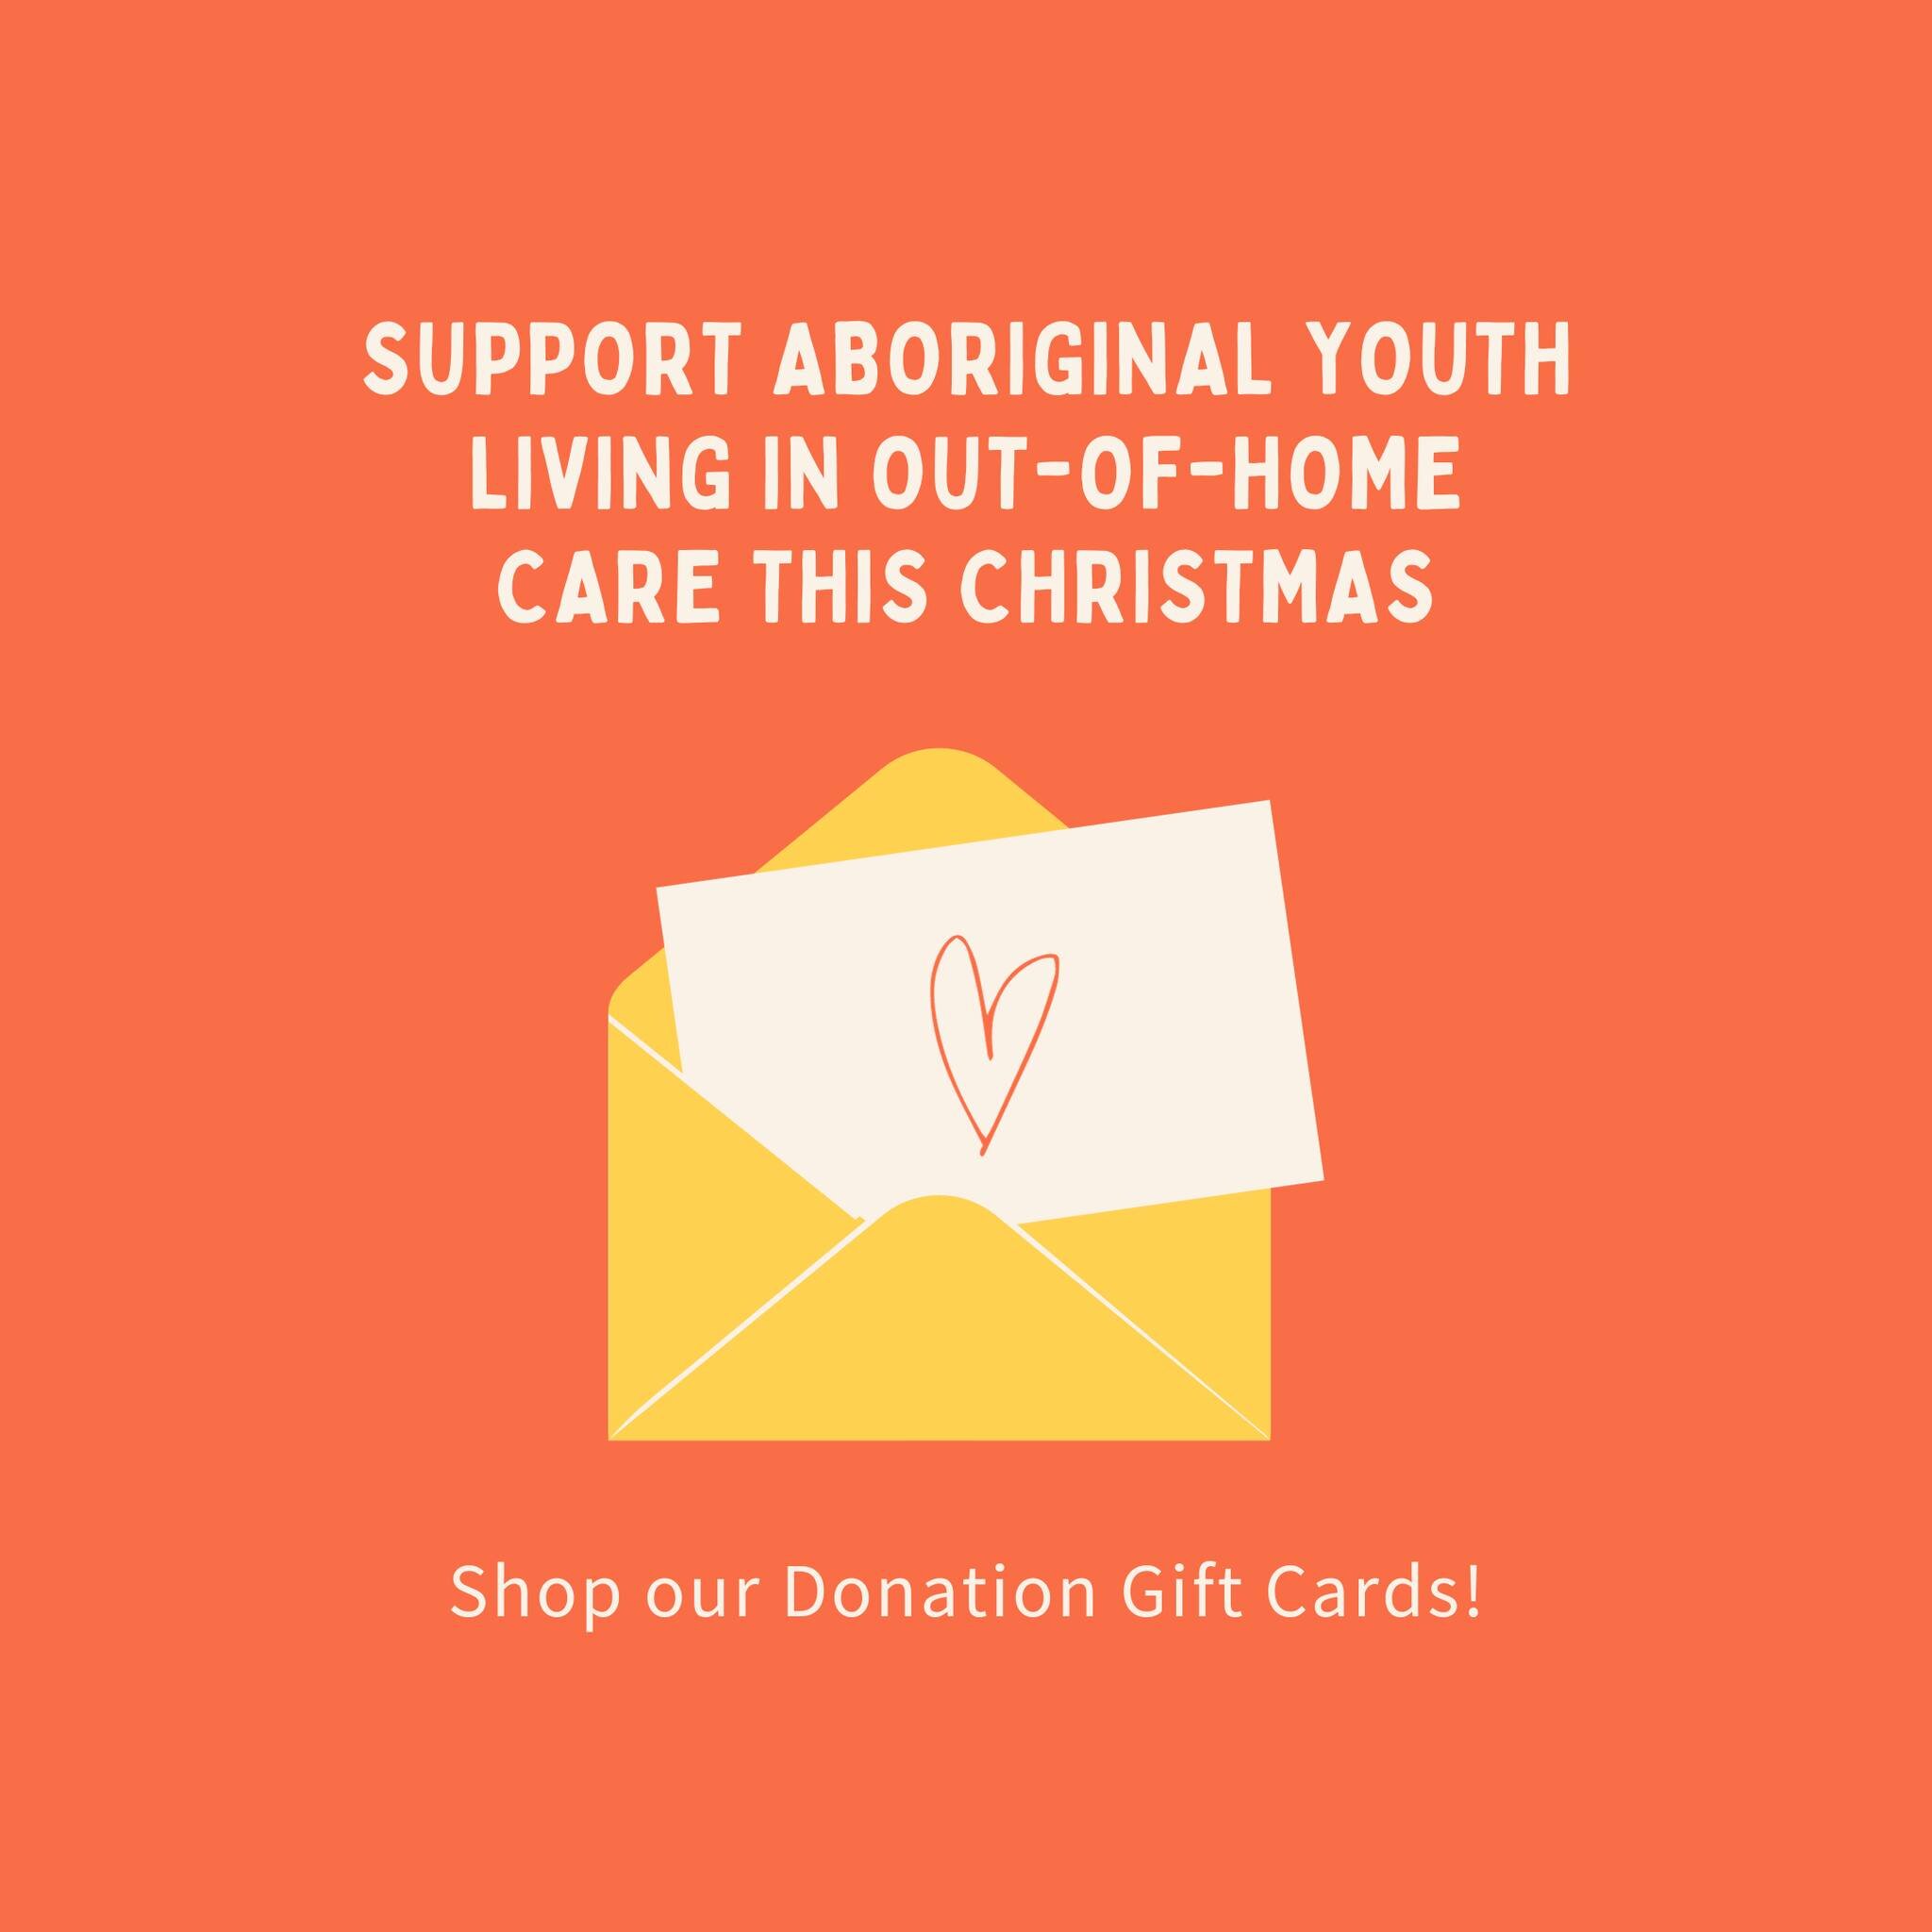 Just over a month until Christmas! Give someone a meaningful present this year by purchasing one of our Donation Gift Cards. ✨✉️
⁣⁣
All proceeds will go directly to supporting the deadly young people in our program. Once purchased, you&rsquo;ll recei